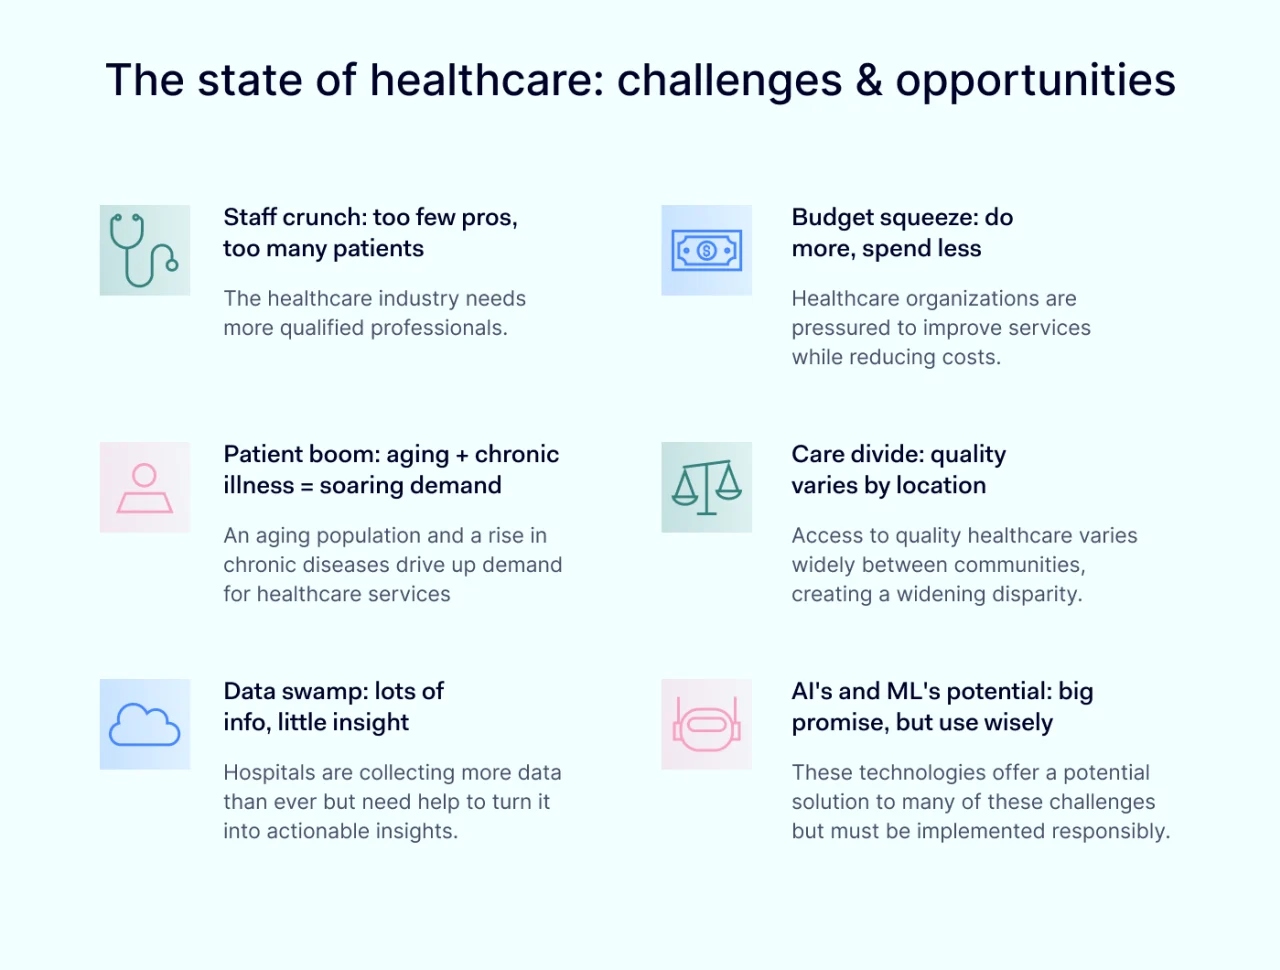 The state of healthcare: challenges and opportunities